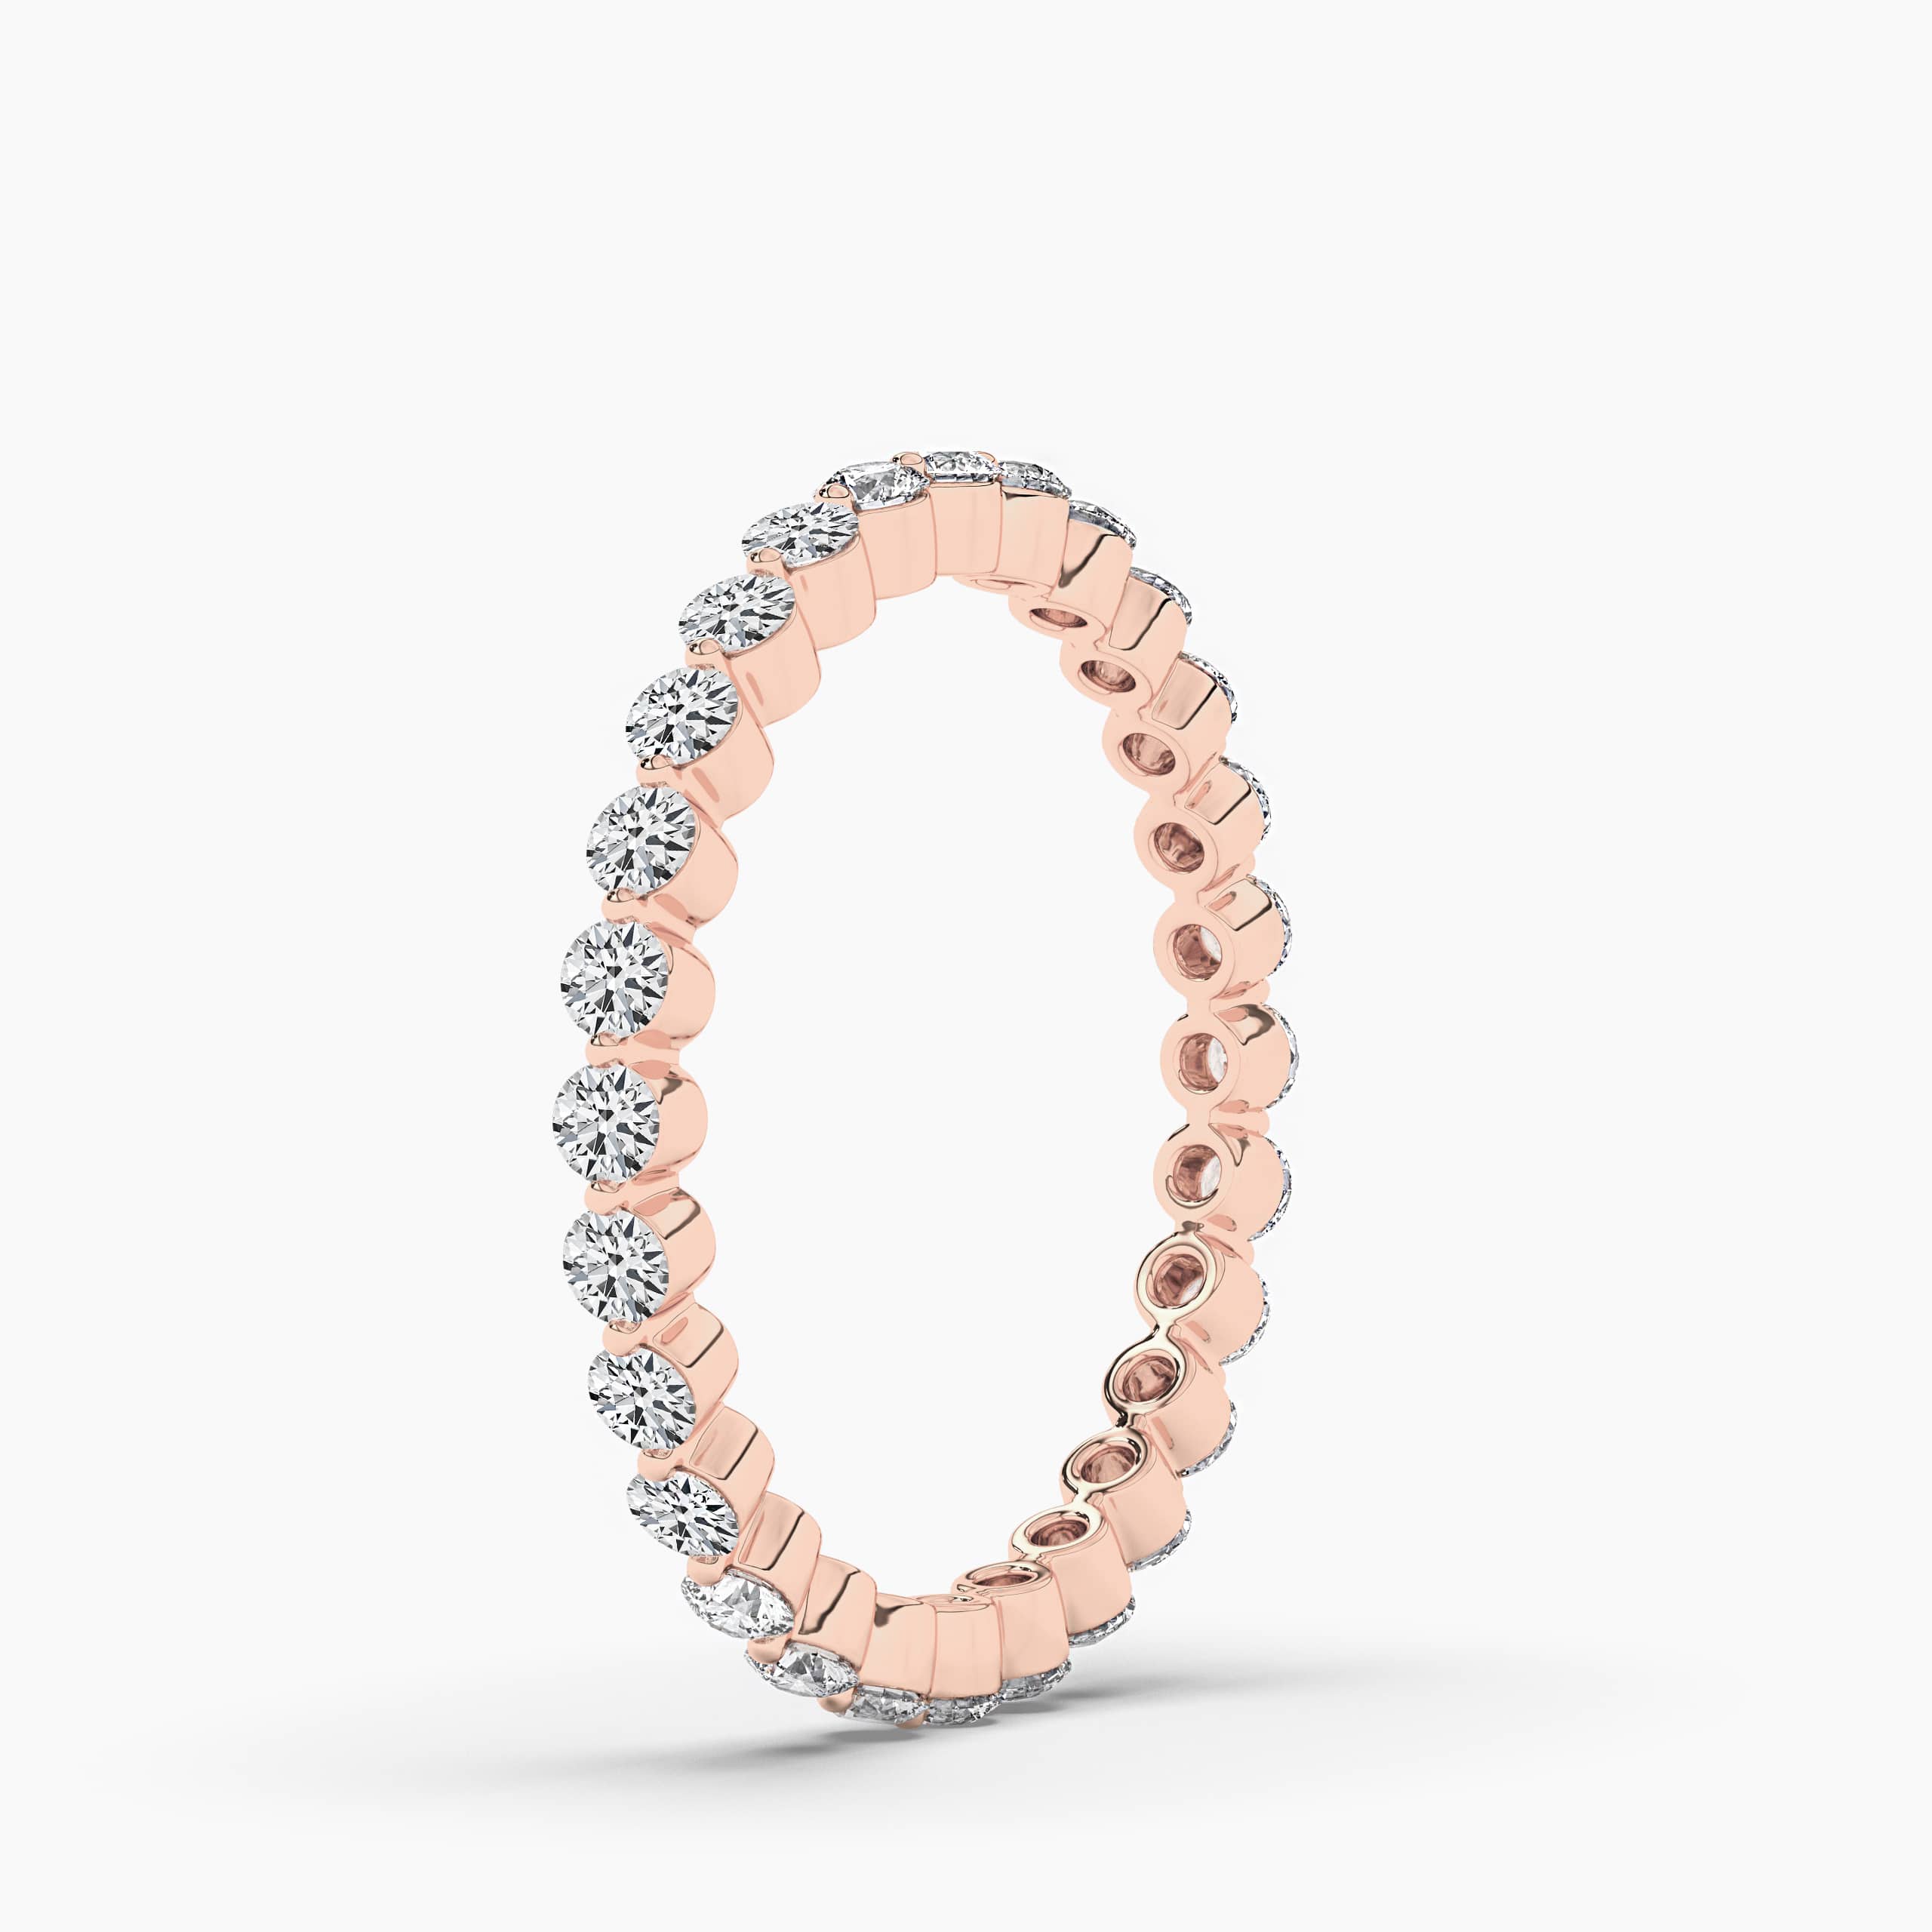 Eternity Lab Diamond Ring To Proposal rose gold eternity ring